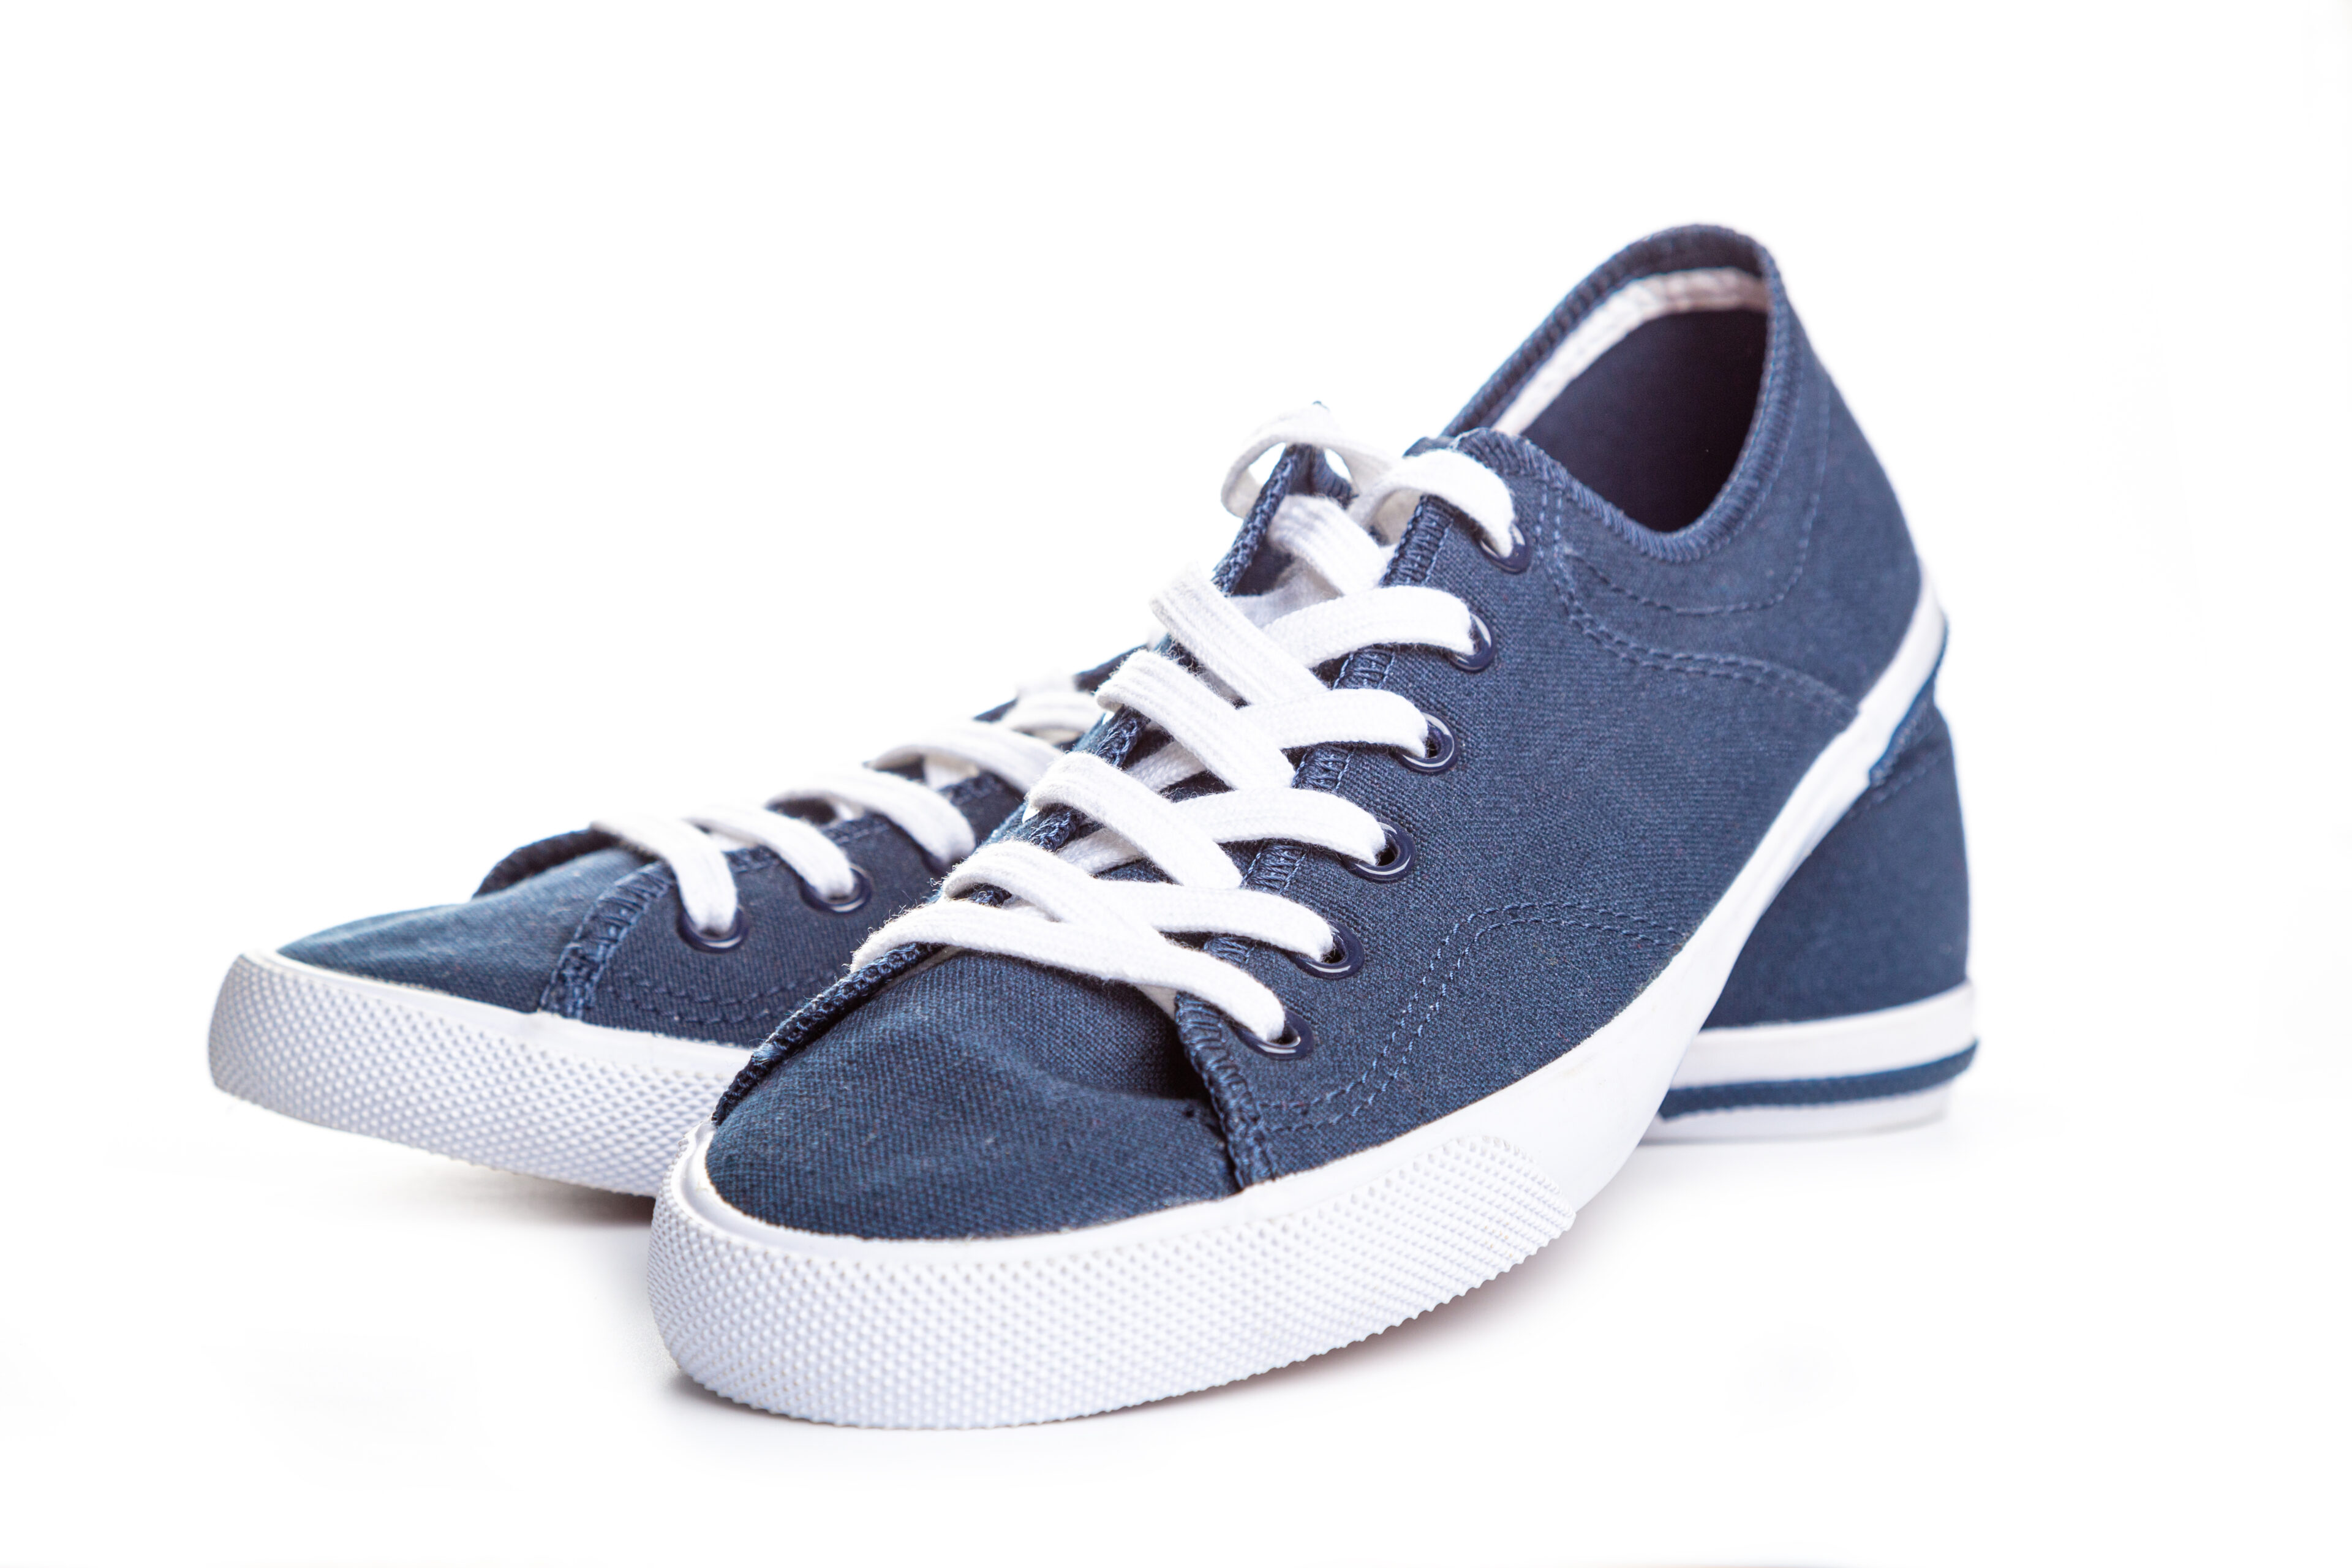 Sneakers In A Dark Blue Thick Fabric